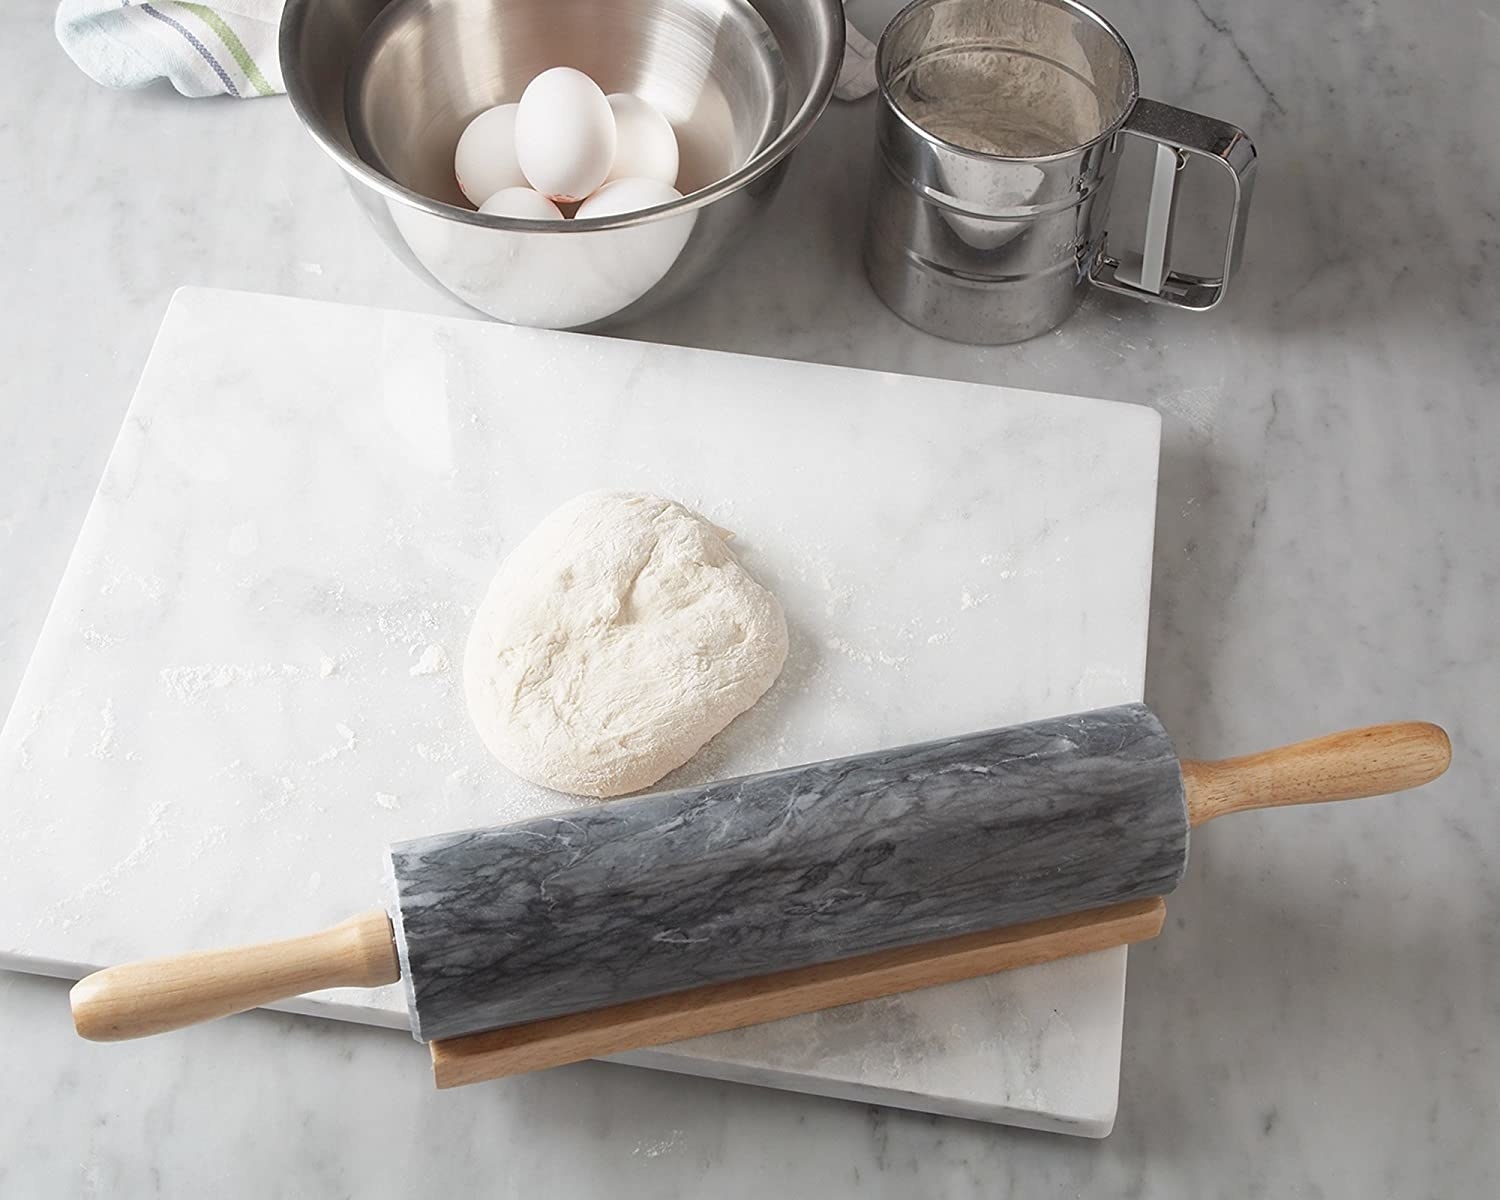 A marble rolling pin rolling out a ball of floured dough